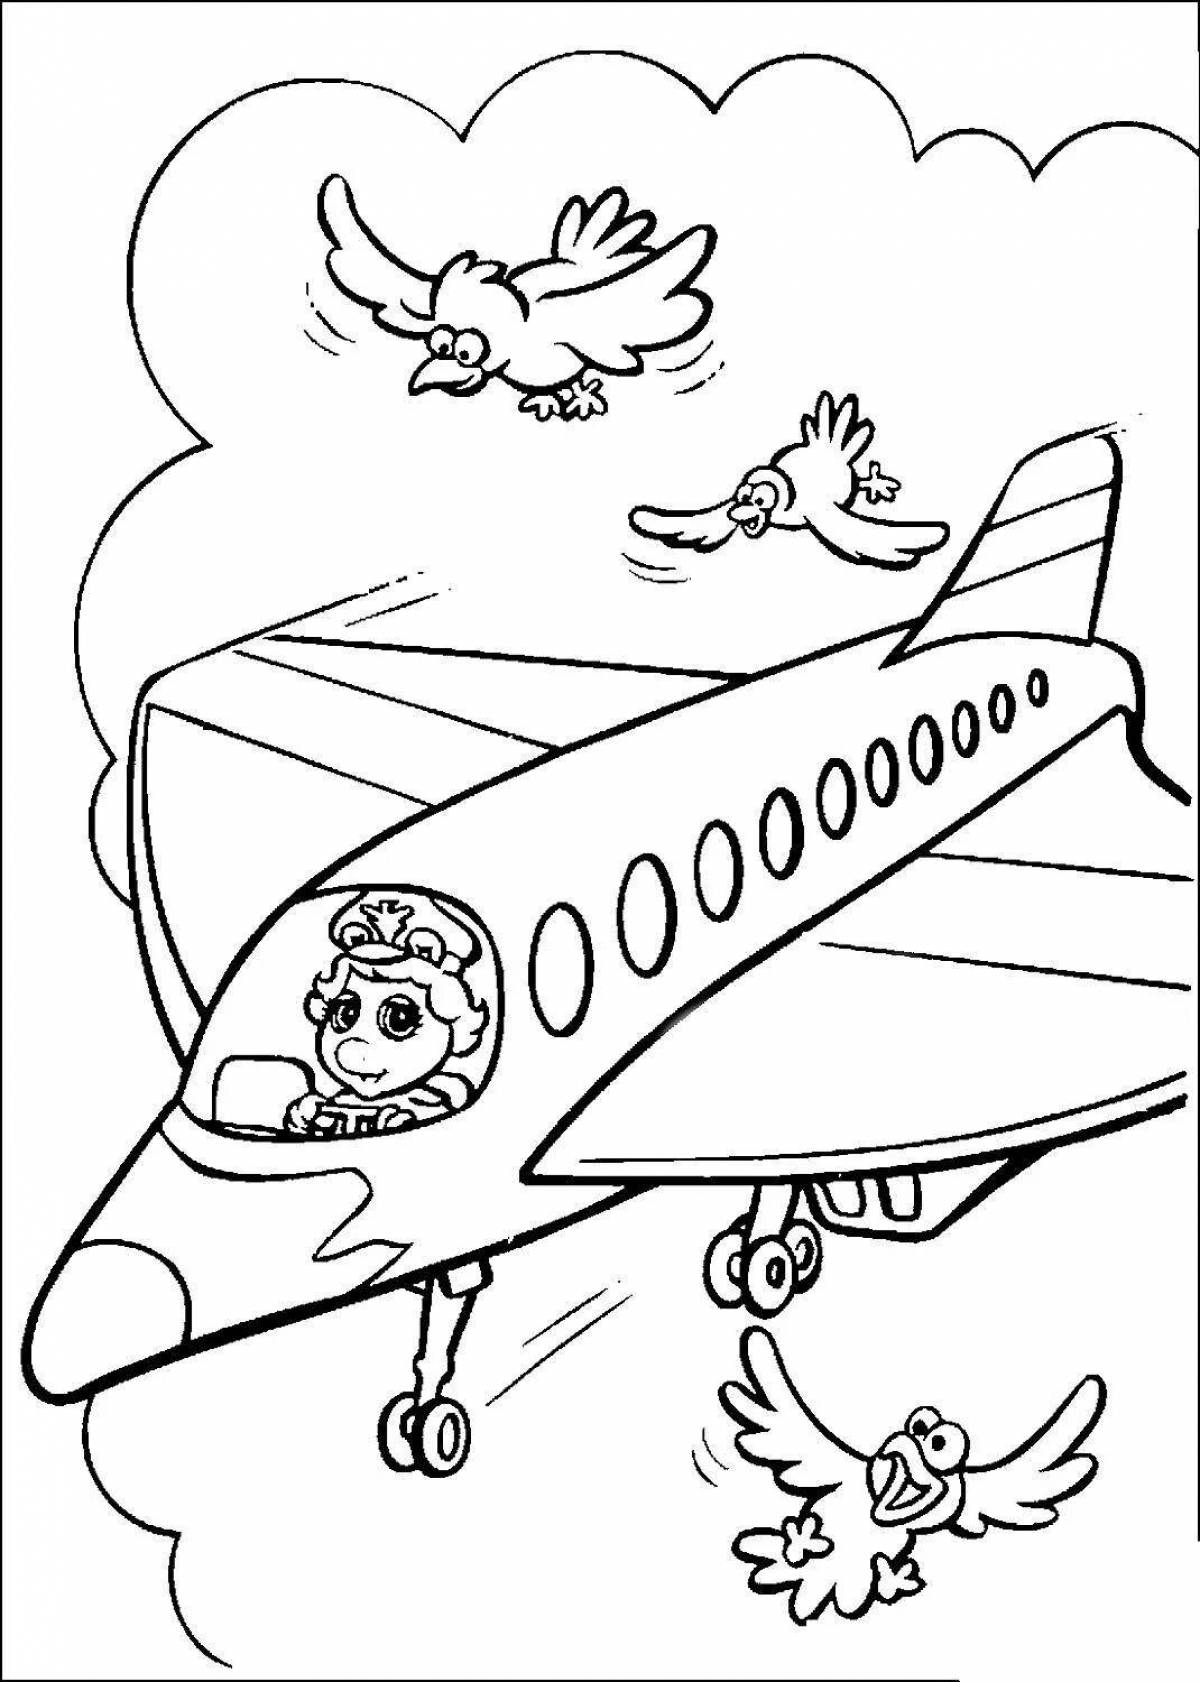 Coloring page energetic pilot